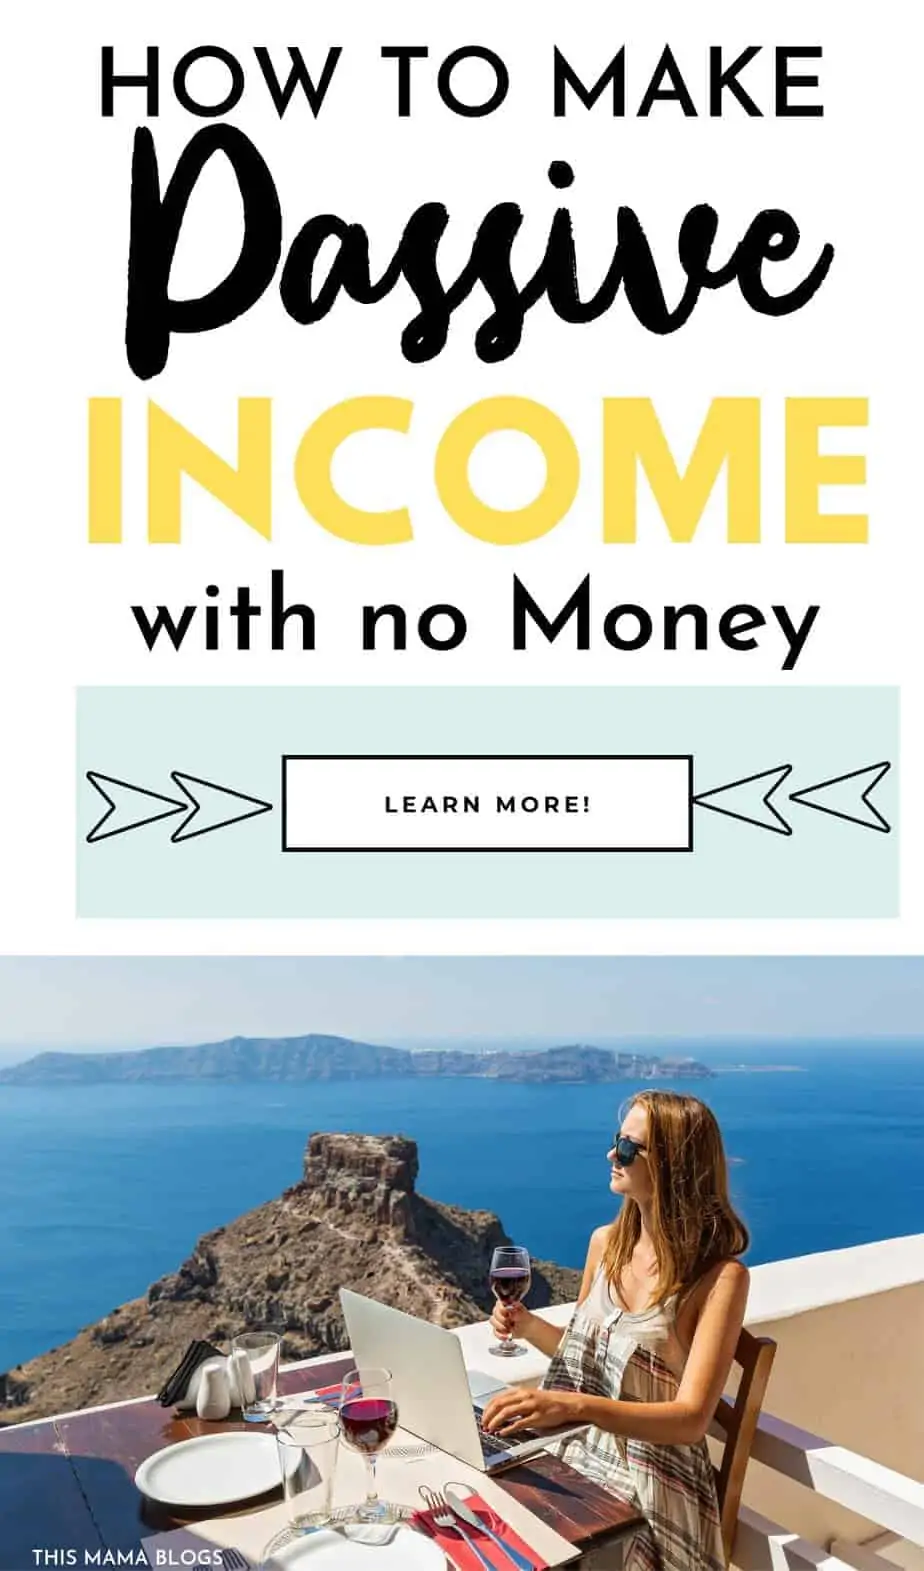 Everyone wants to make money while they sleep...but how to make passive income with no money or when you have little to invest? Here are 9 ways to make passive income for you! Yes, you can start generating passive income right now! #passiveincomeideas #realestateinvesting #makemoneywhileyousleep